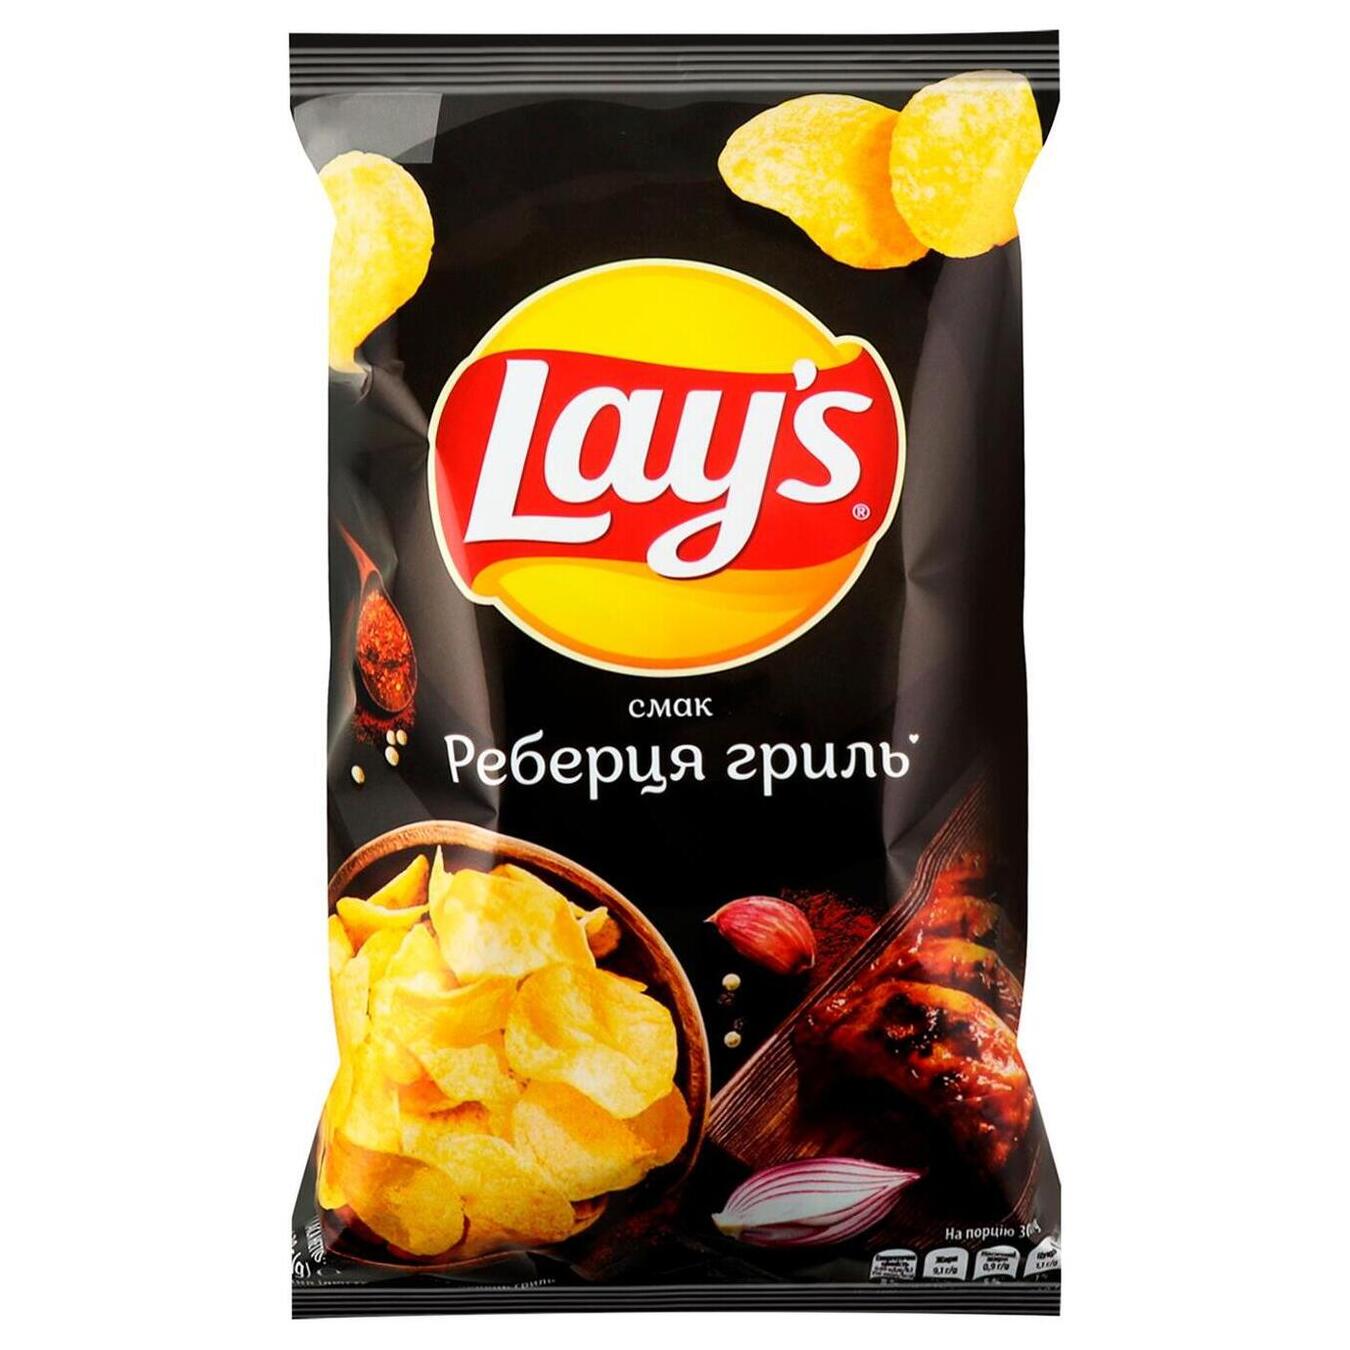 Lay's potato chips grilled ribs soft packaging 120g